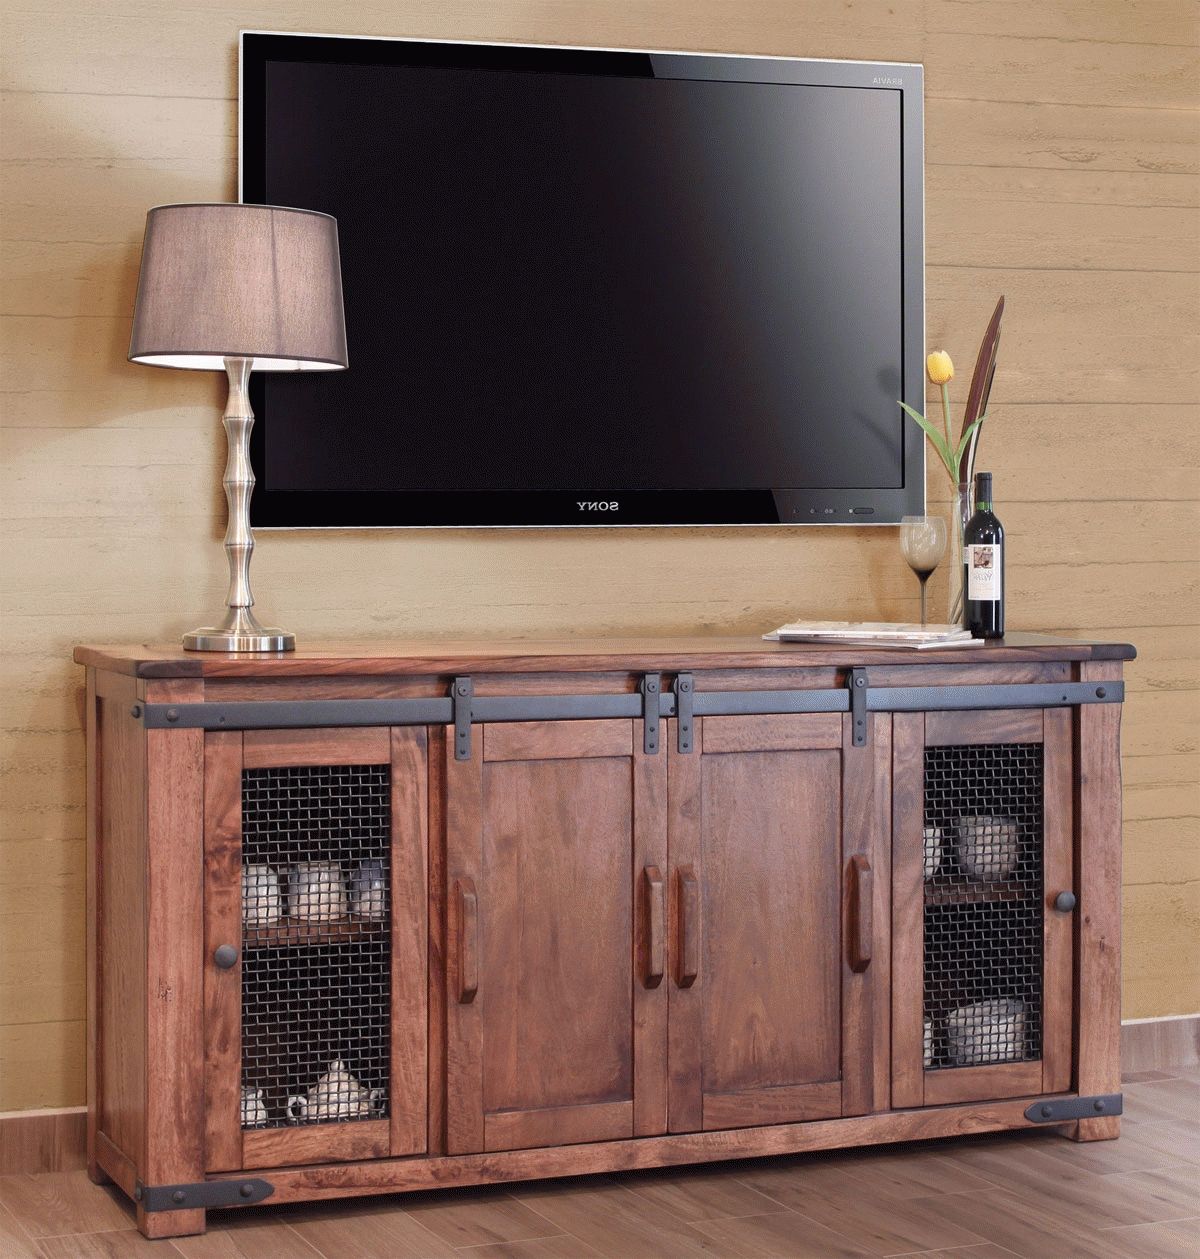 Rustic Tv Stand, Wood Tv Stand, Pine Tv Stand Pertaining To Pine Tv Cabinets (View 16 of 20)